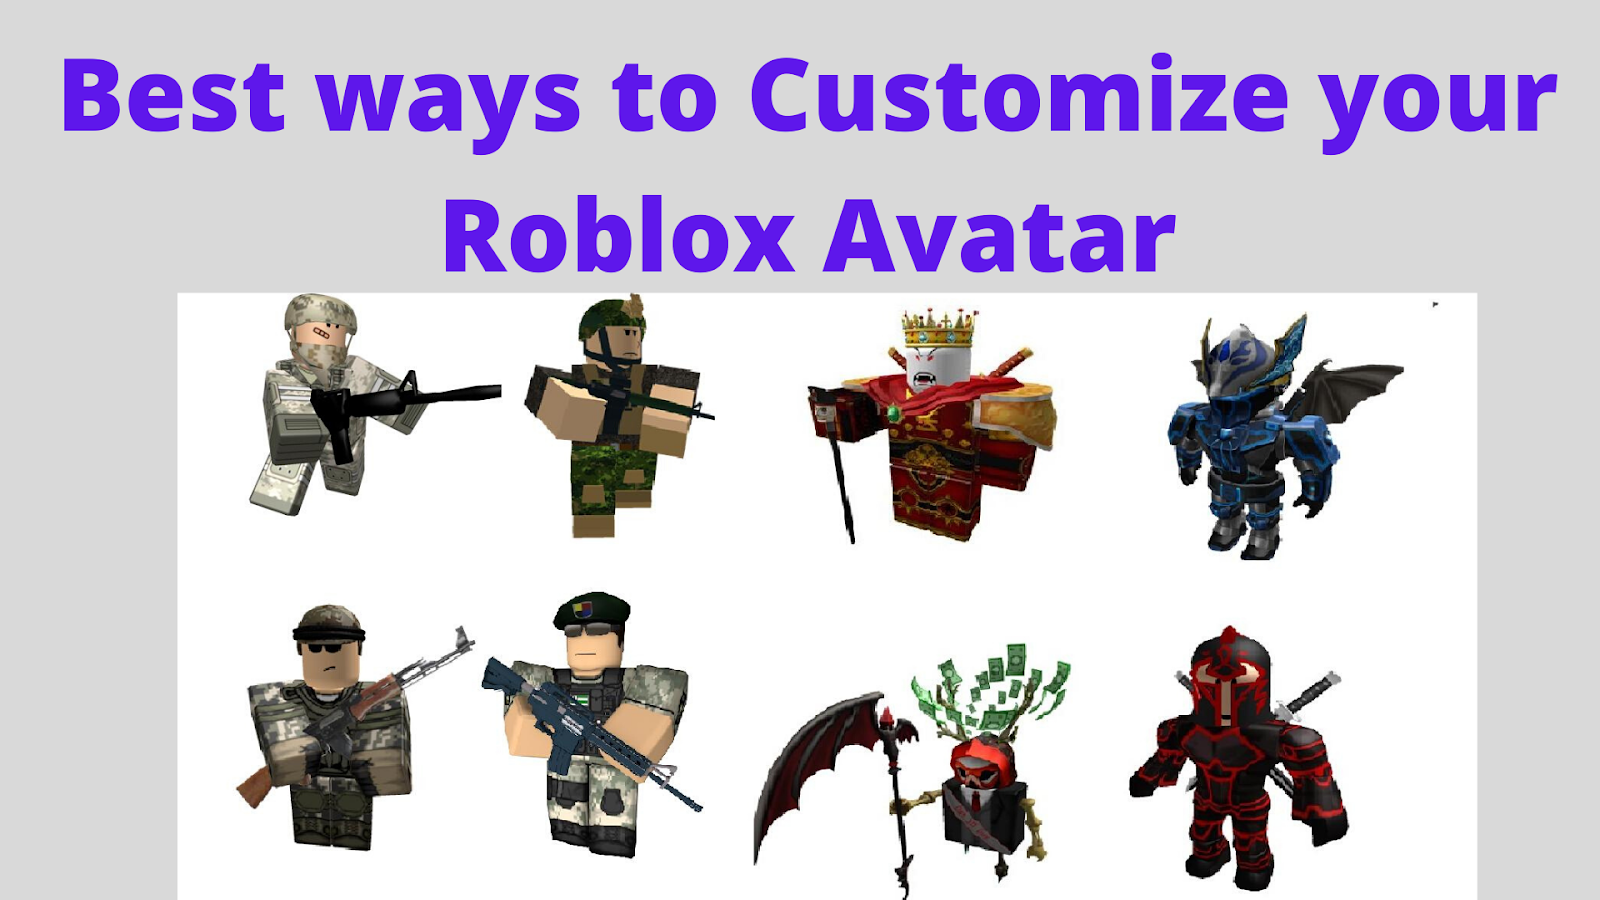 Your Roblox Avatar